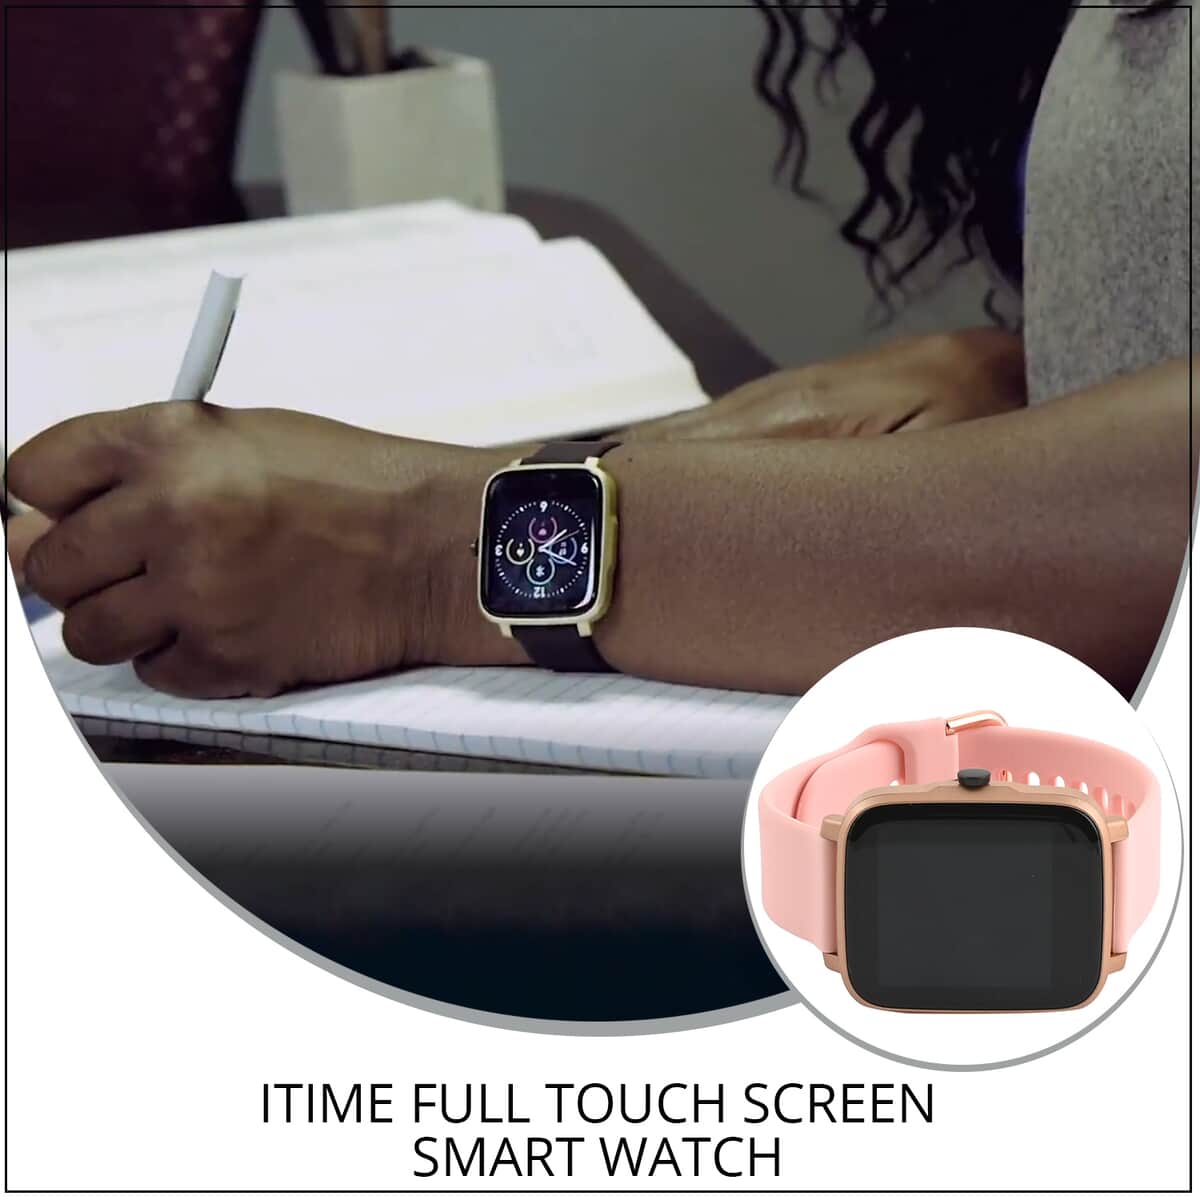 iTime Full Touch Screen Smart Watch with Blush Silicone Strap (40 mm Dial) image number 1